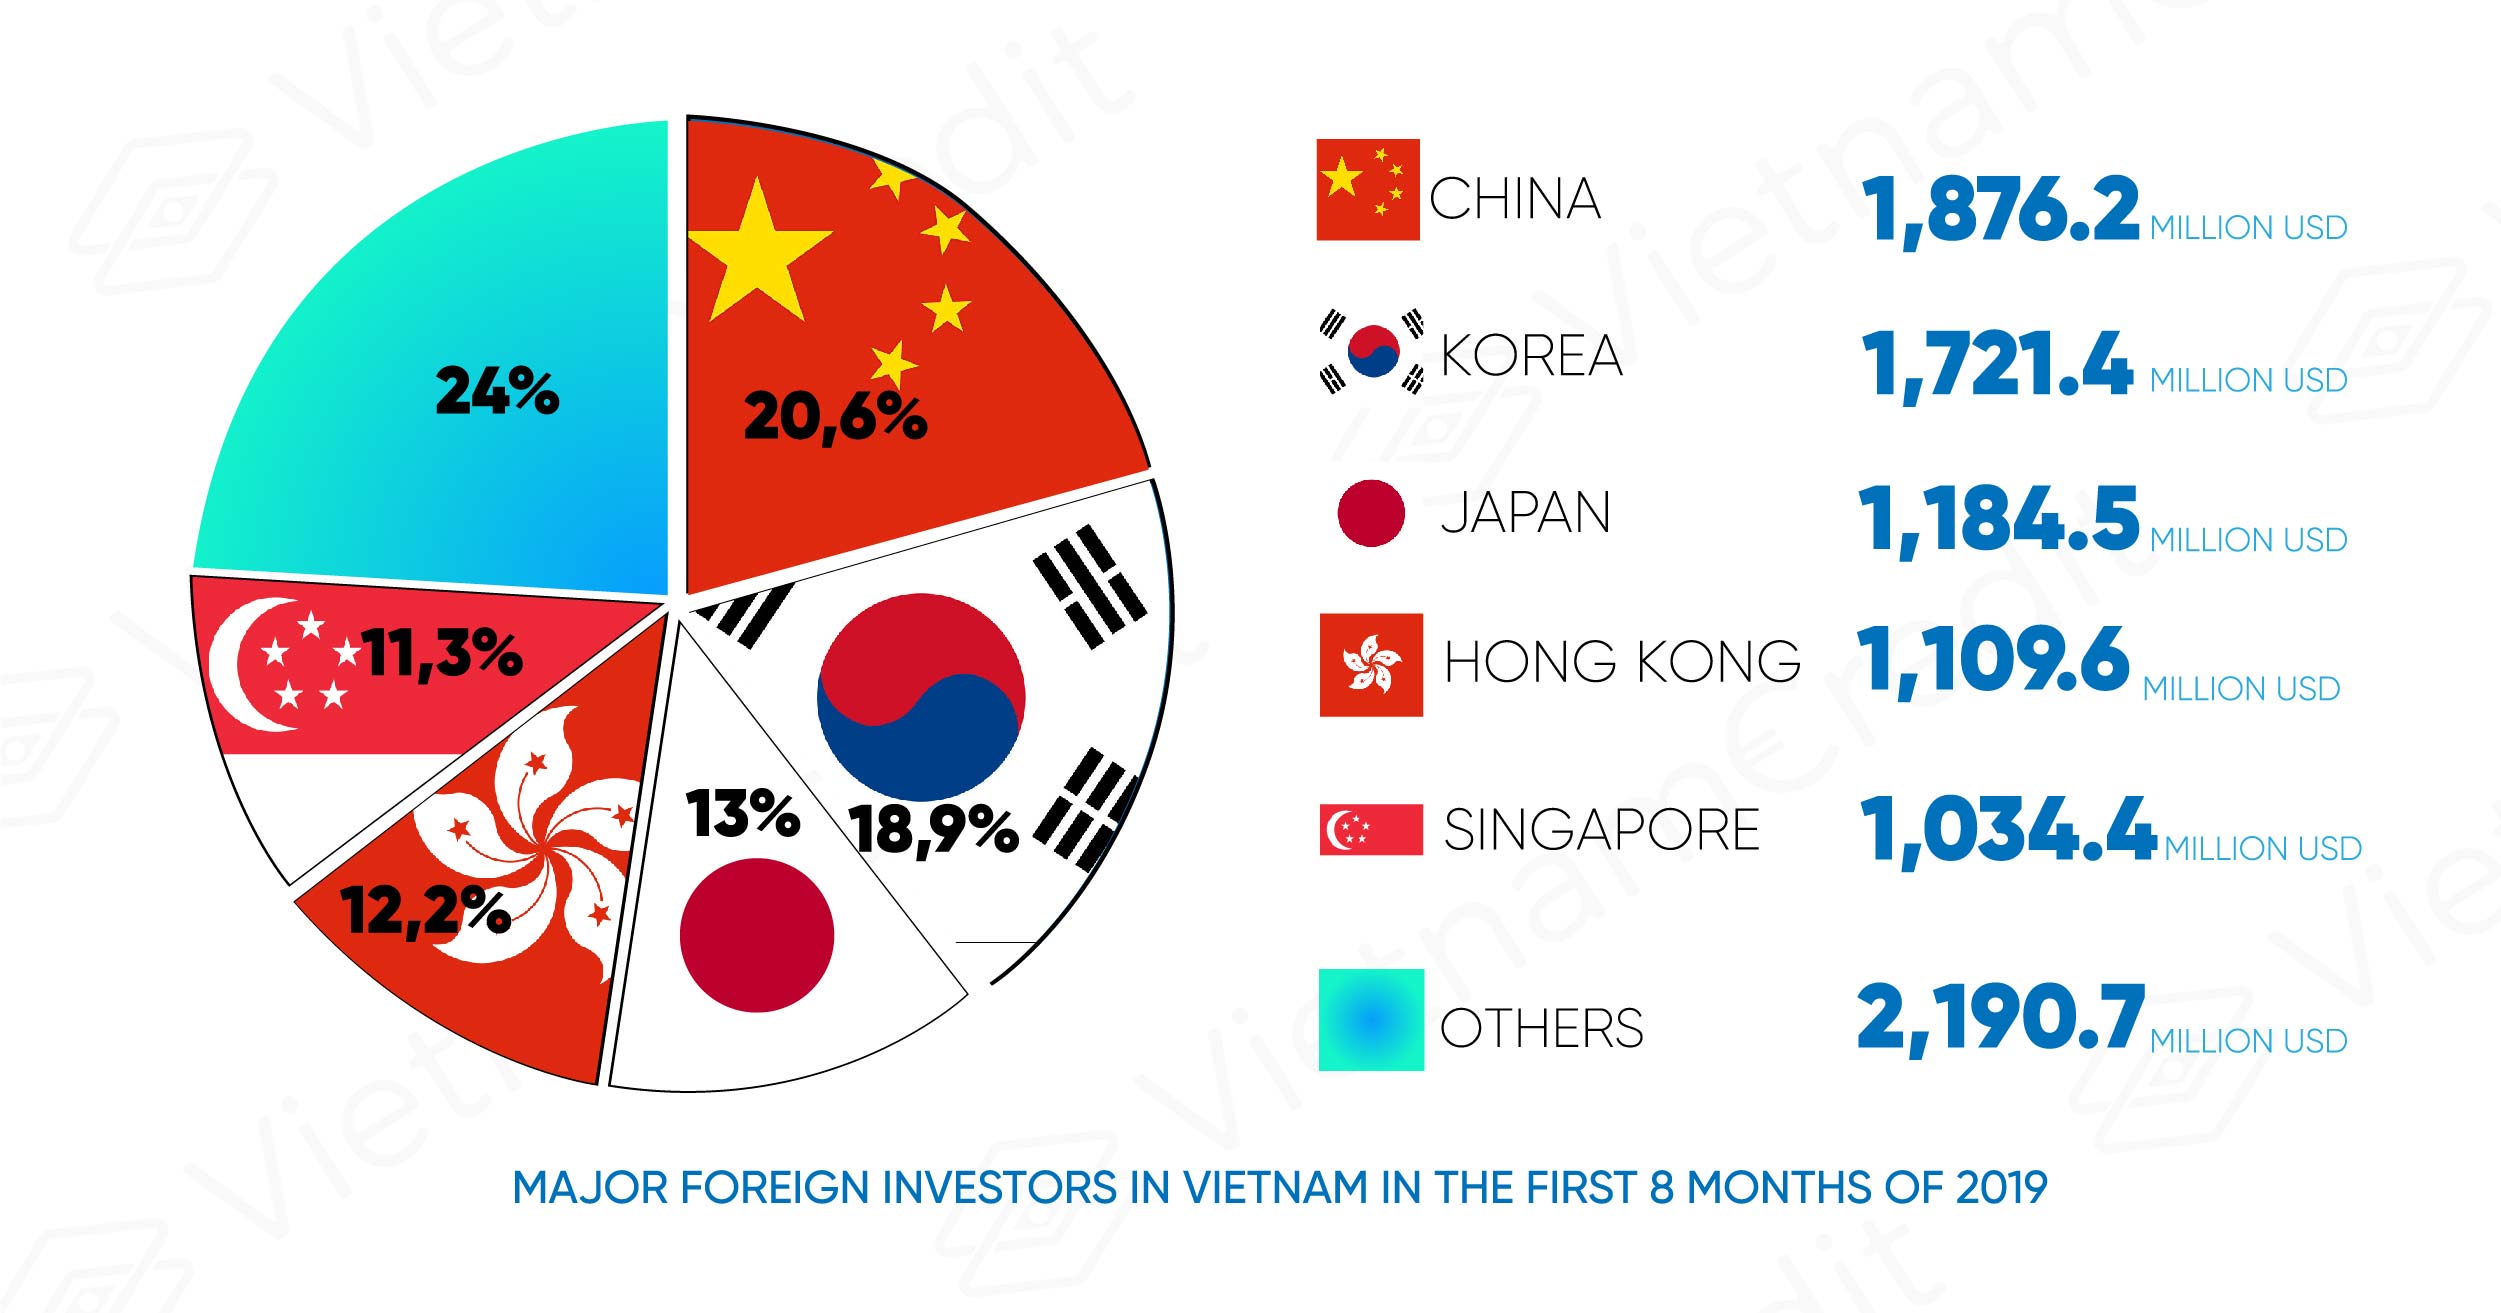 China, the FDI leader in Vietnam after 8 months of 2019 3